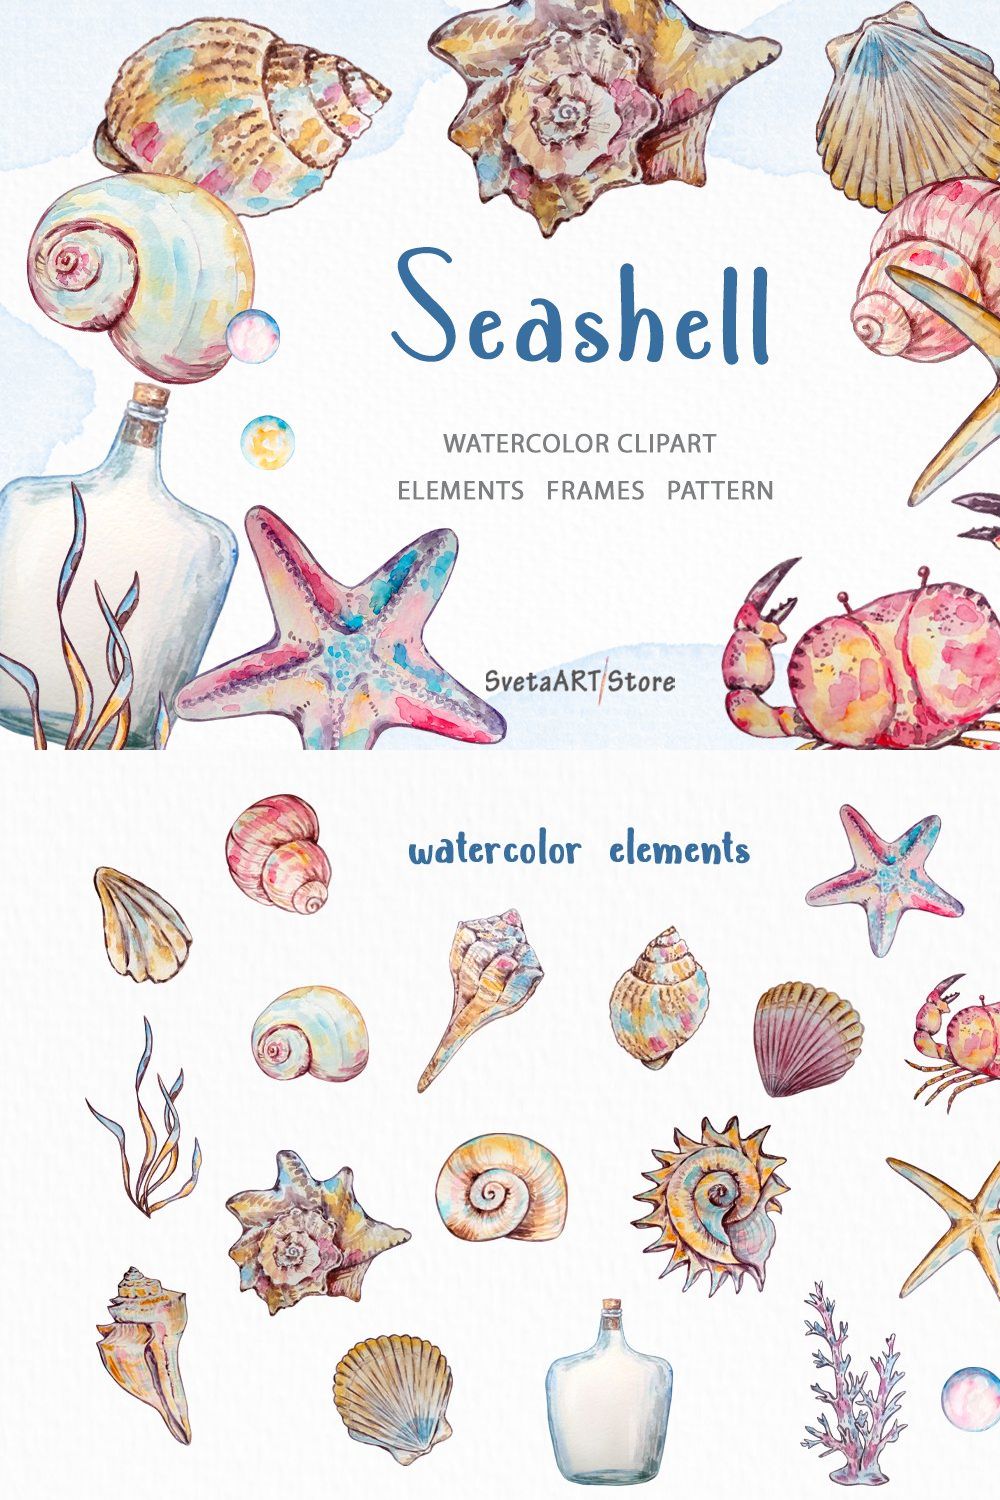 Watercolor Seashell Clipart pinterest preview image.